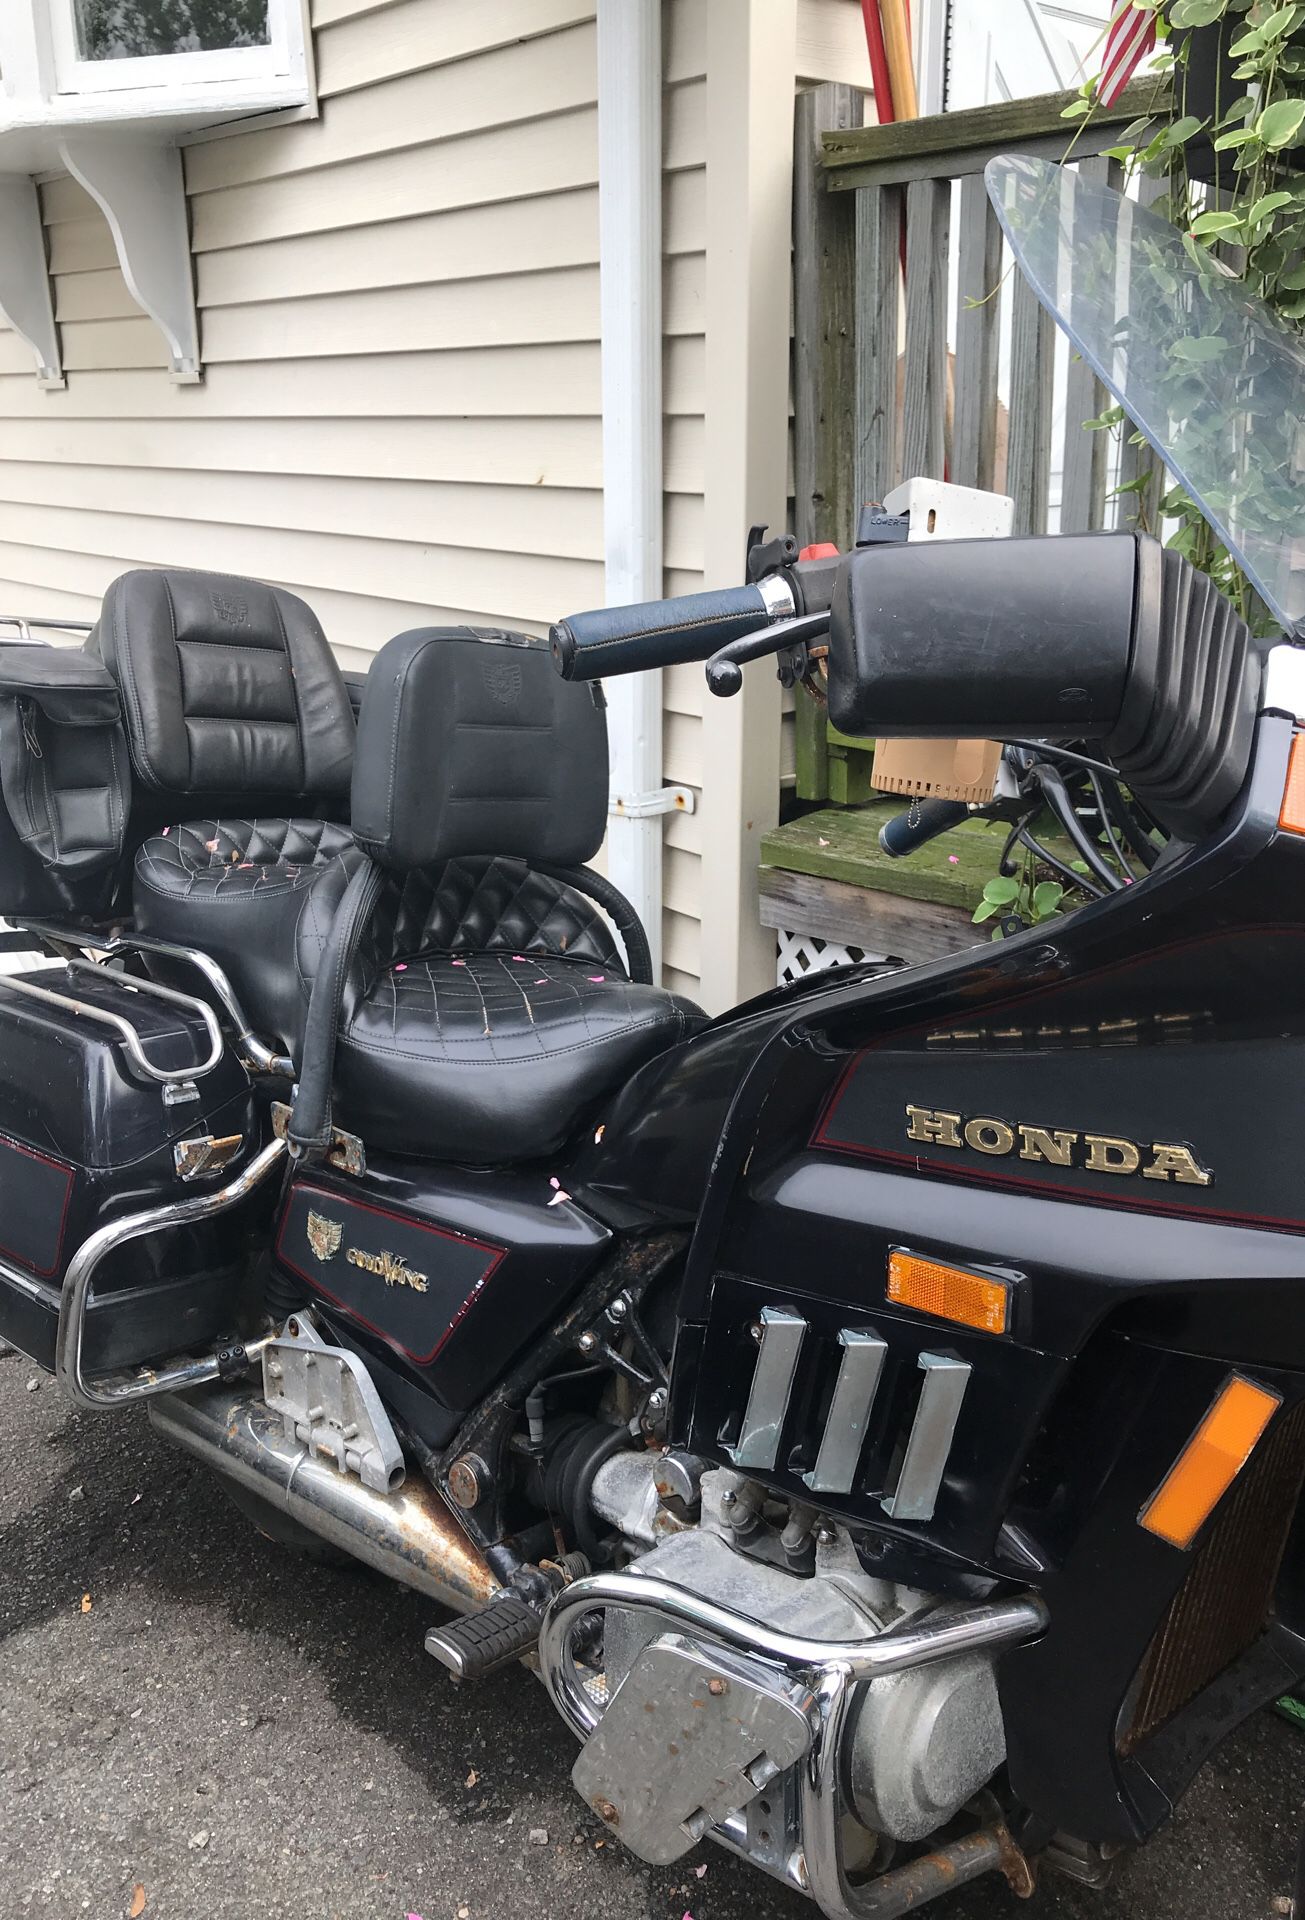 Honda Goldwing. Great riding and touring bike for one person or for a couple. Needs some tic but a great bike to feel safe riding. $550.00 or no.